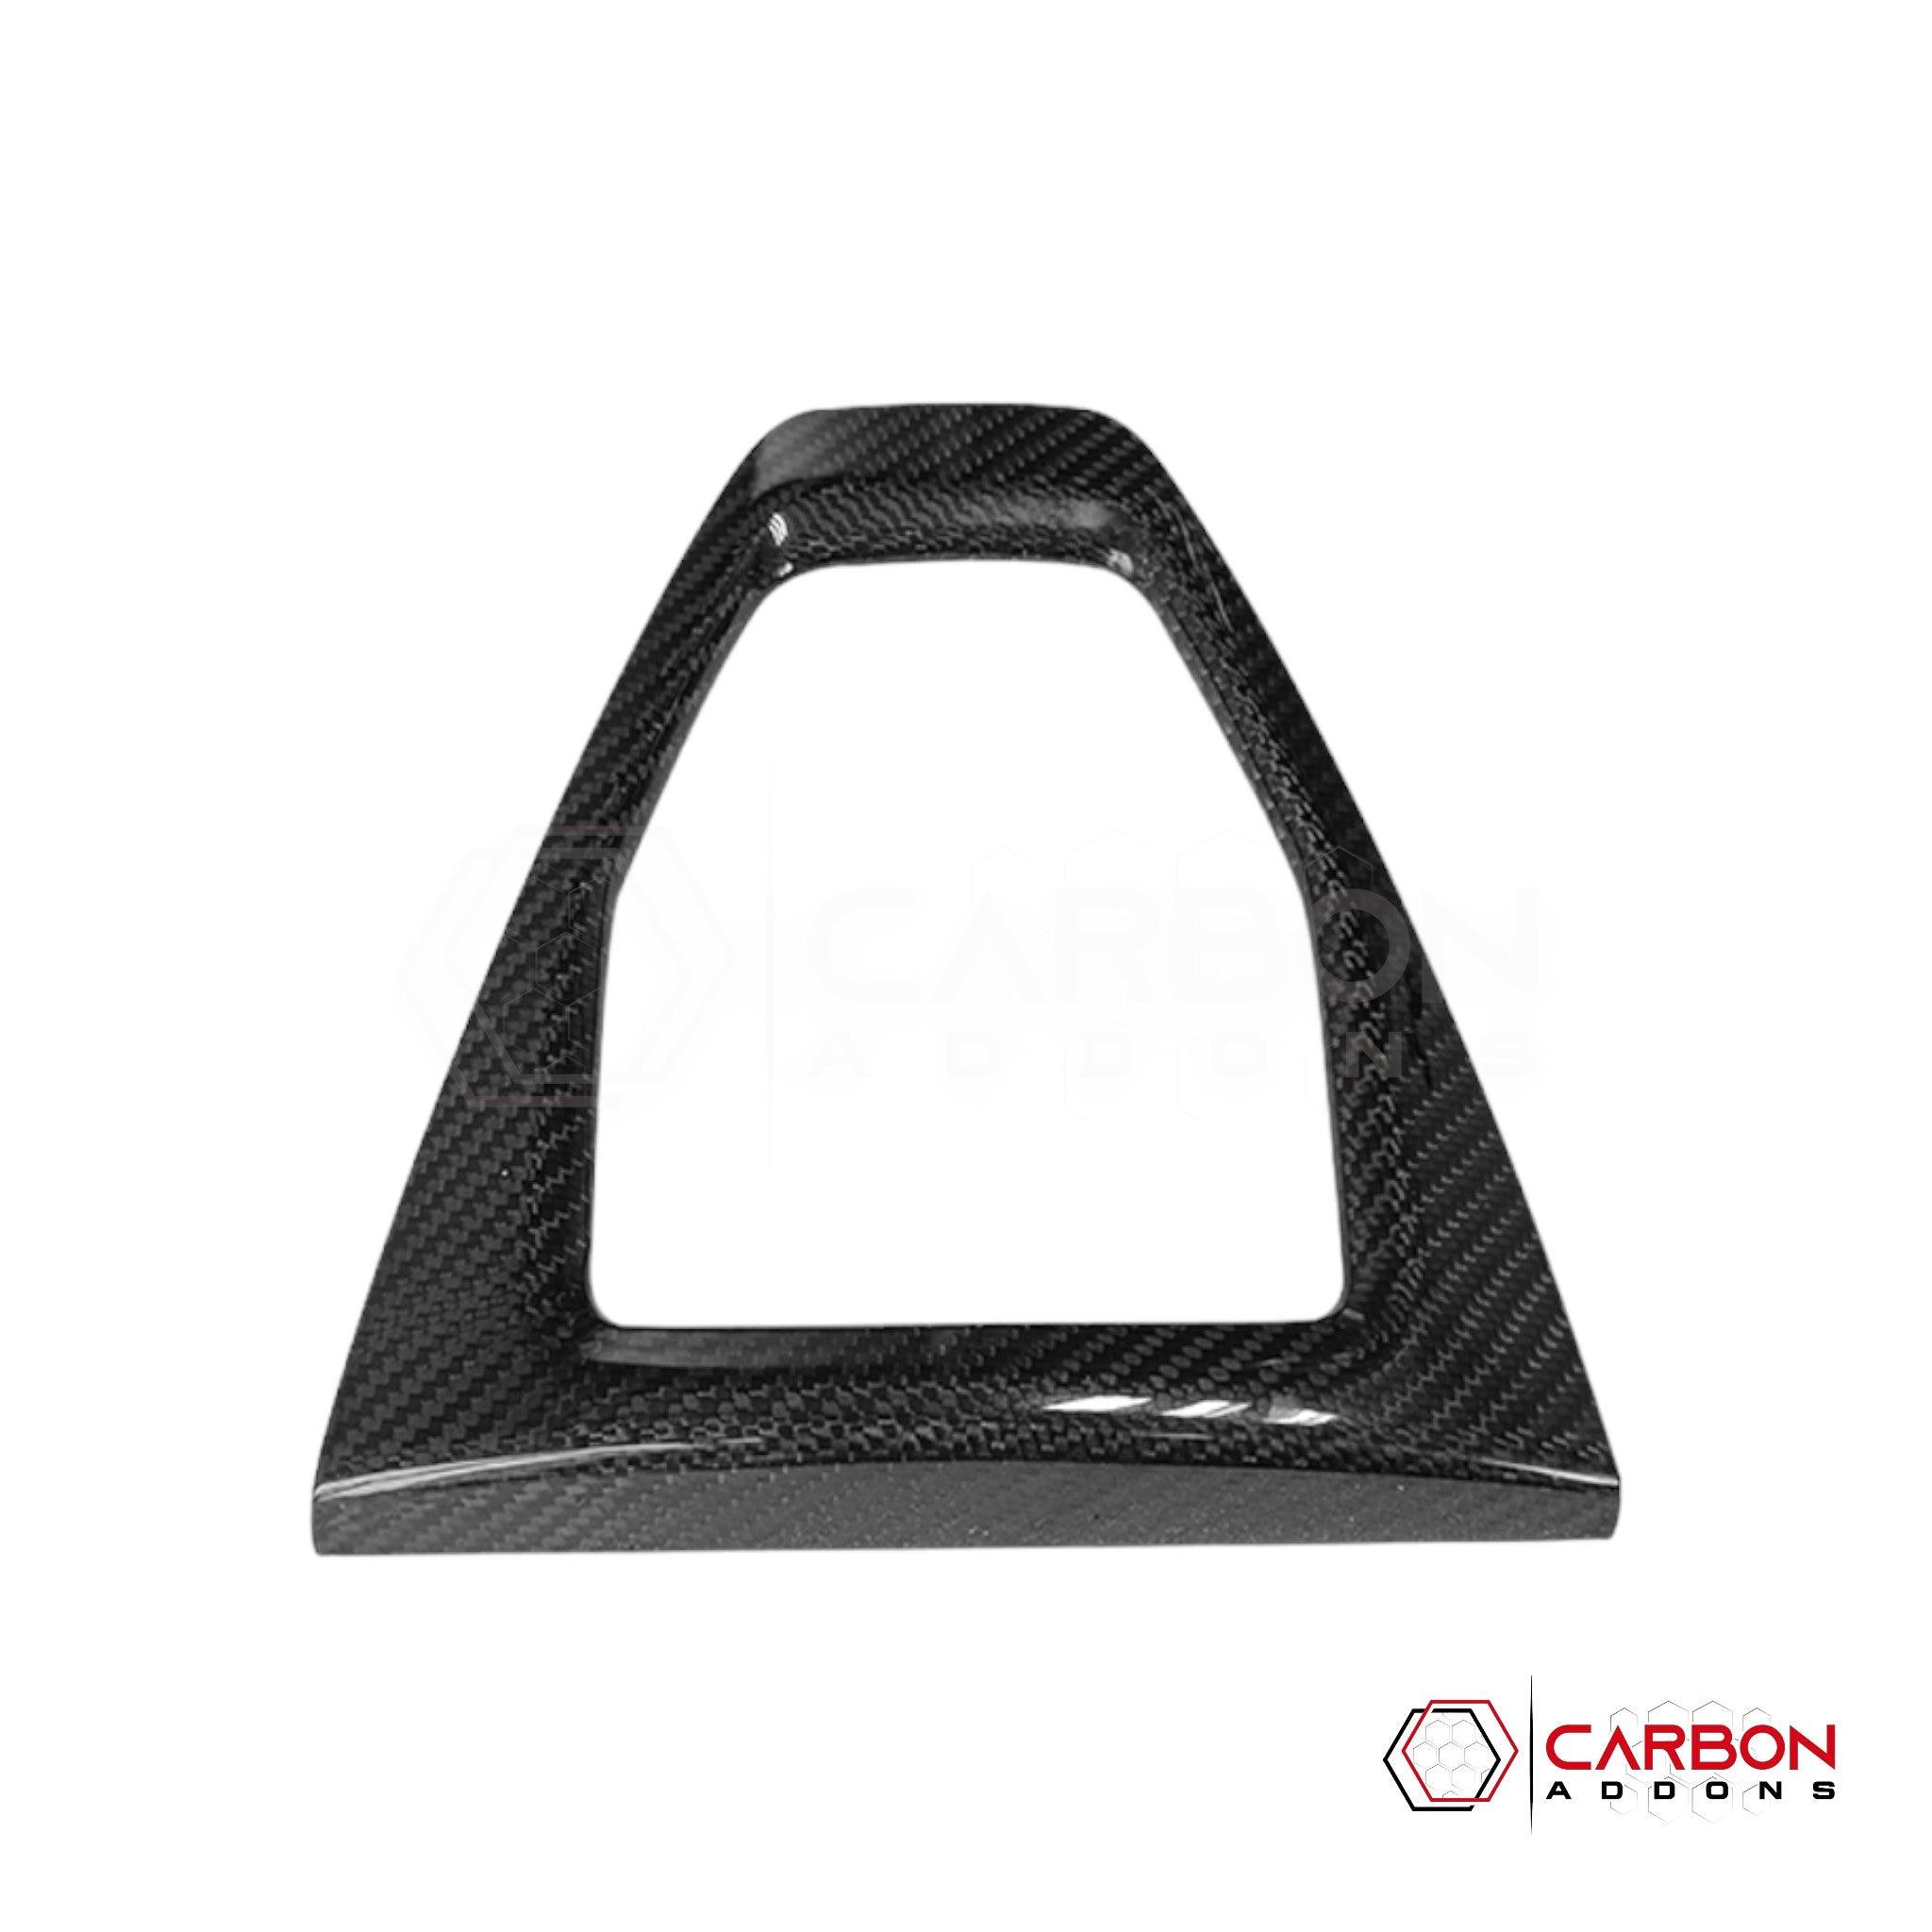 [Coming Soon] 2024-Up S650 Ford Mustang Hard Carbon Fiber Gear Shift Trim Cover - carbonaddons Carbon Fiber Parts, Accessories, Upgrades, Mods